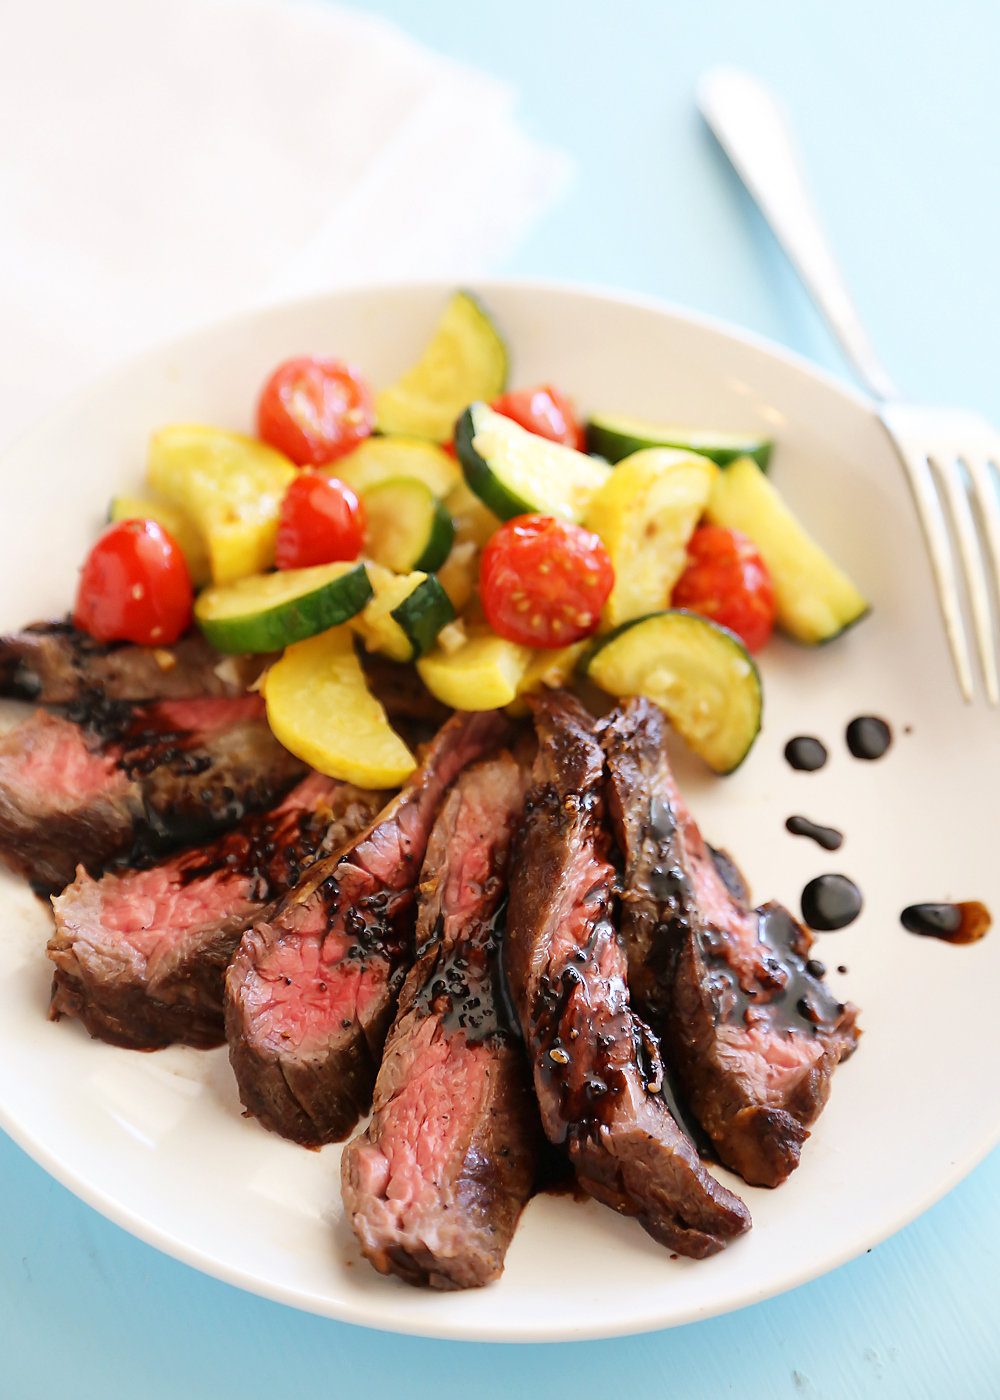 Skillet Balsamic Skirt Steak with Garlic Zucchini, Squash and Tomatoes - Melt-in-your-mouth tangy, tender steak dinner with veggies, easily made in one skillet! Thecomfortofcooking.com